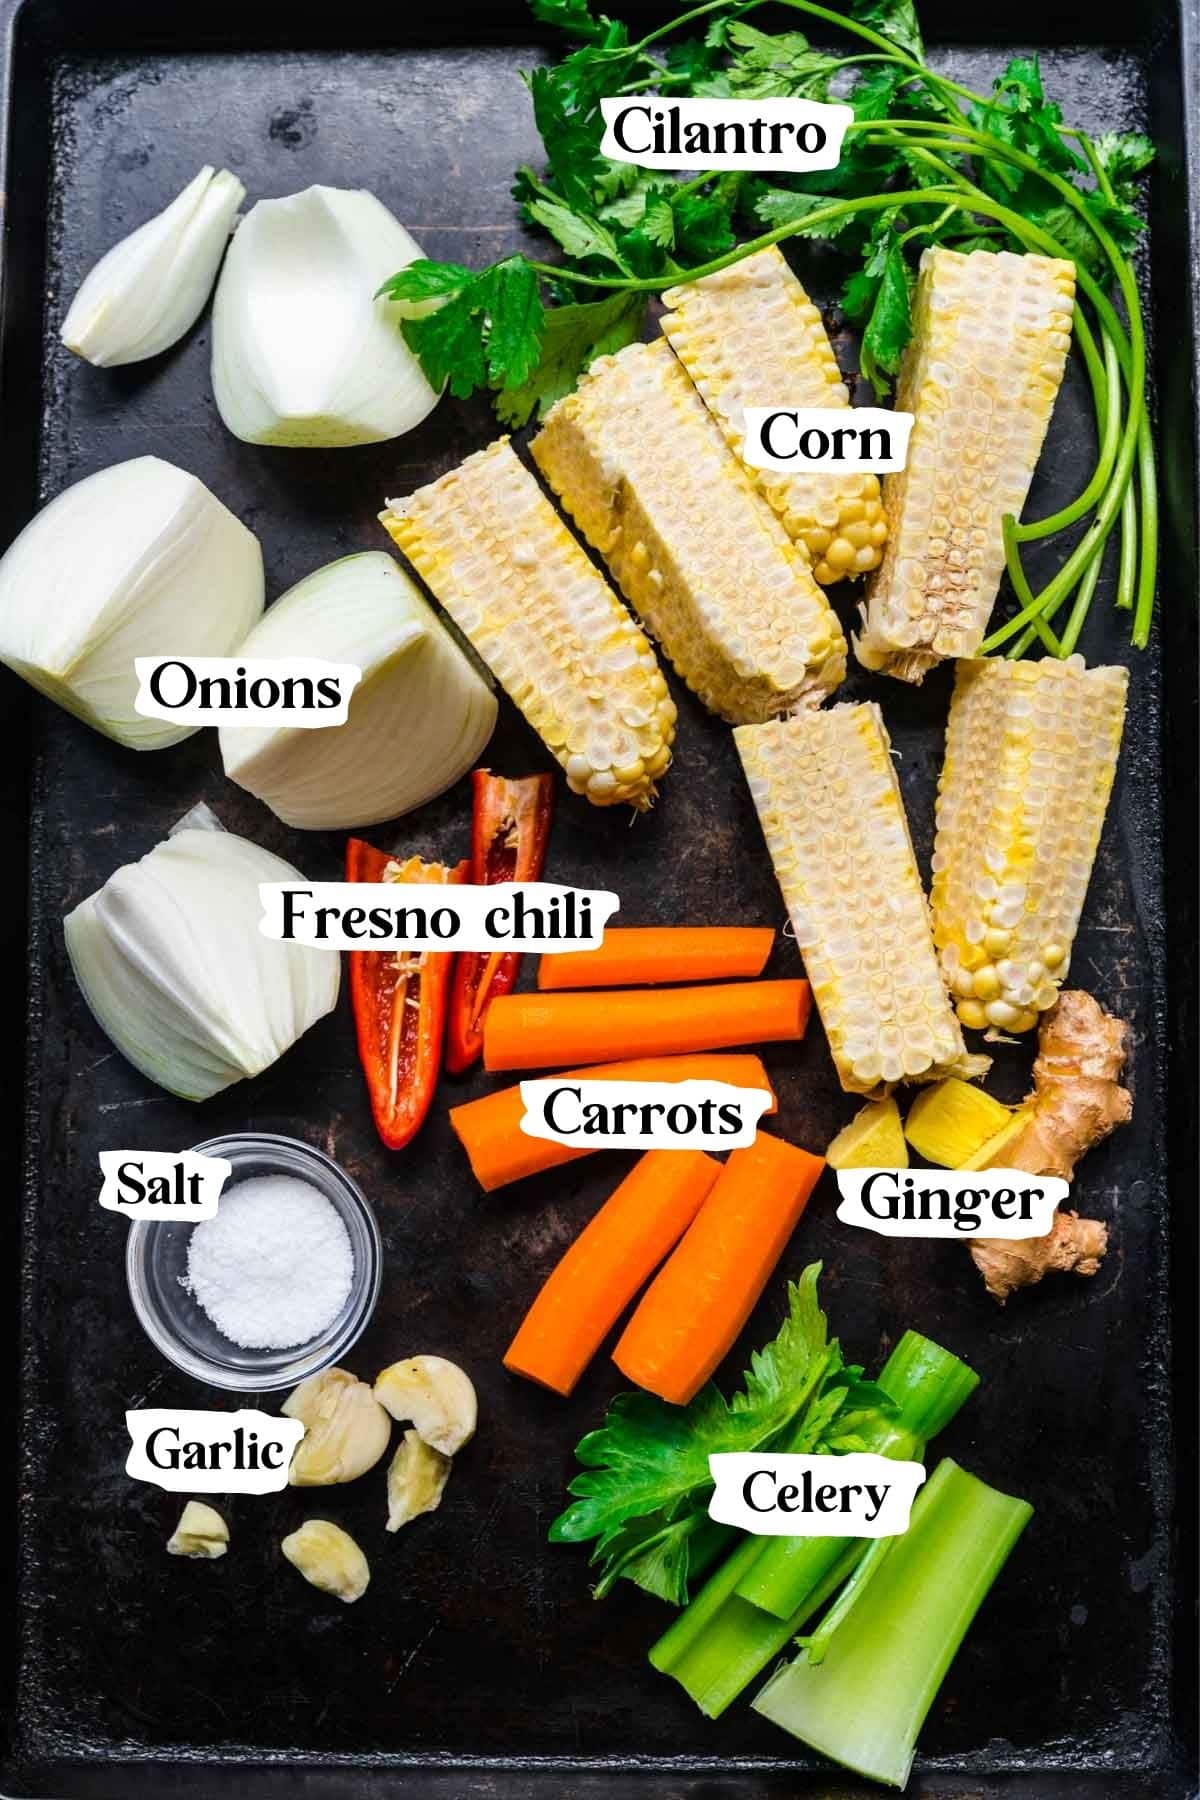 Overhead shot of corn stock ingredients, including corn cobs, onions, fresno chilis, carrots, etc.